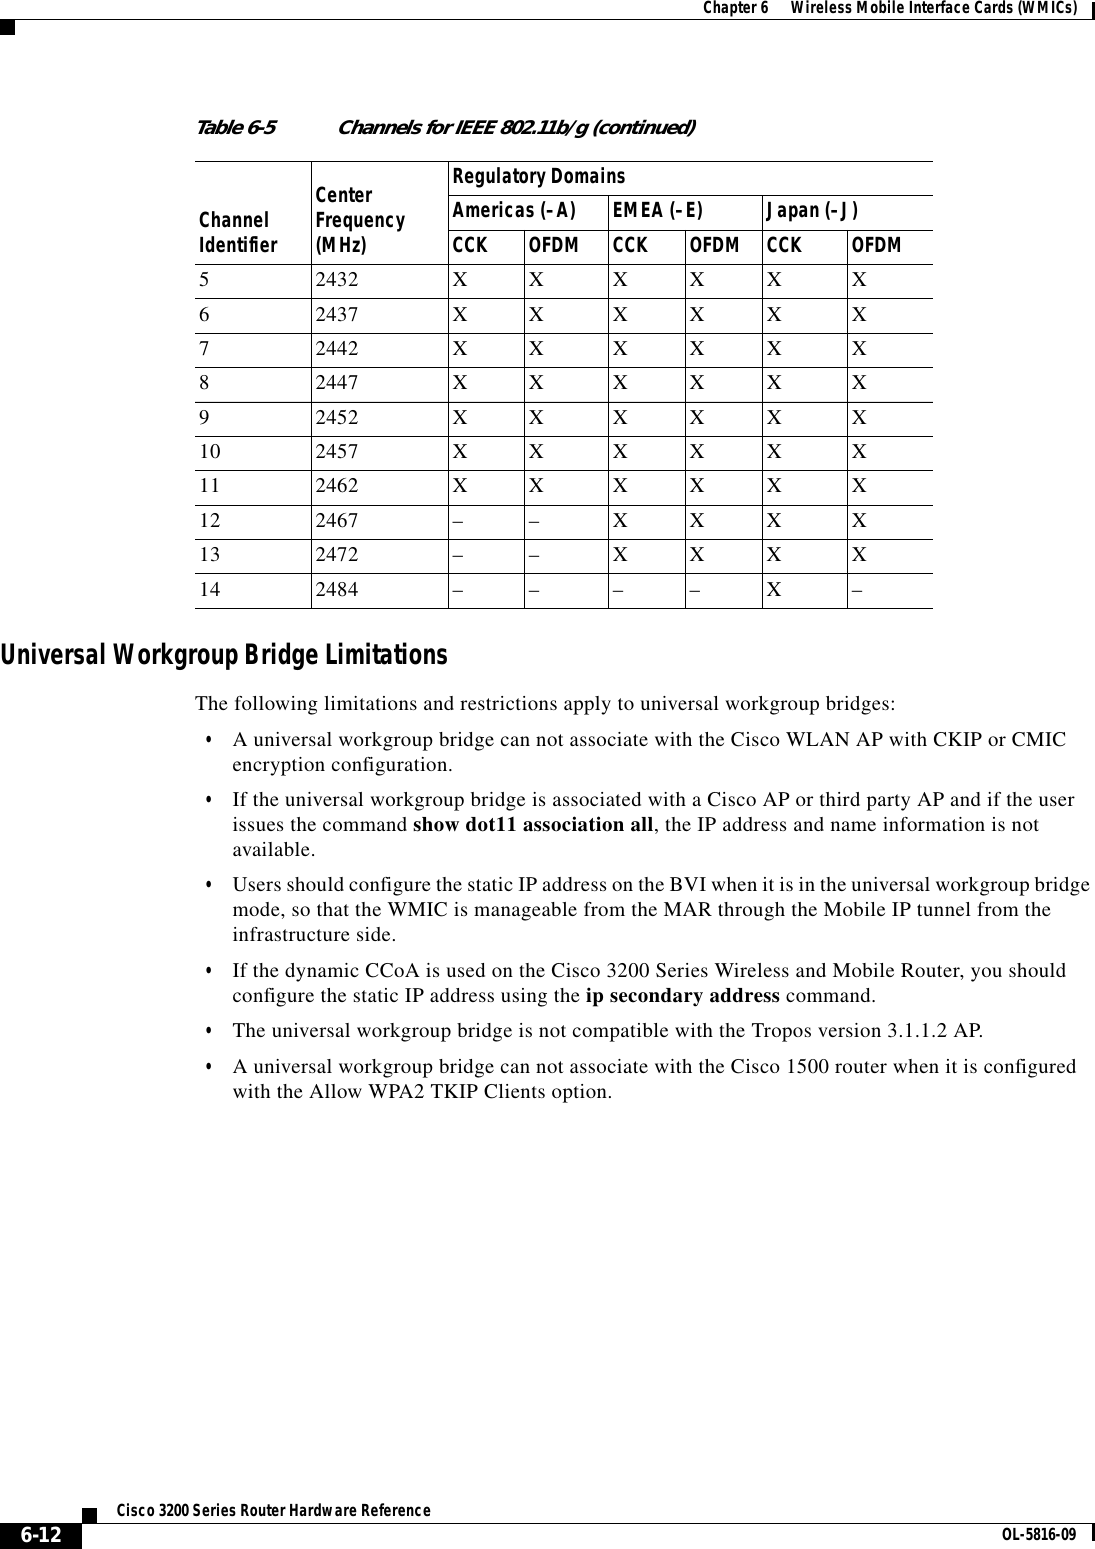 6-12Cisco 3200 Series Router Hardware Reference OL-5816-09Chapter 6      Wireless Mobile Interface Cards (WMICs)Universal Workgroup Bridge LimitationsThe following limitations and restrictions apply to universal workgroup bridges:•A universal workgroup bridge can not associate with the Cisco WLAN AP with CKIP or CMICencryption configuration.•If the universal workgroup bridge is associated with a Cisco AP or third party AP and if the userissues the command show dot11 association all, the IP address and name information is notavailable.•Users should configure the static IP address on the BVI when it is in the universal workgroup bridgemode, so that the WMIC is manageable from the MAR through the Mobile IP tunnel from theinfrastructure side.•If the dynamic CCoA is used on the Cisco 3200 Series Wireless and Mobile Router, you shouldconfigure the static IP address using the ip secondary address command.•The universal workgroup bridge is not compatible with the Tropos version 3.1.1.2 AP.•A universal workgroup bridge can not associate with the Cisco 1500 router when it is configuredwith the Allow WPA2 TKIP Clients option.5 2432 X X X X X X6 2437 X X X X X X7 2442 X X X X X X8 2447 X X X X X X9 2452 X X X X X X10 2457 X X X X X X11 2462 X X X X X X12 2467 – – X X X X13 2472 – – X X X X14 2484 – – – – X –Table 6-5 Channels for IEEE 802.11b/g (continued)ChannelIdentifierCenterFrequency(MHz)Regulatory DomainsAmericas (–A) EMEA (–E) Japan (–J)CCK OFDM CCK OFDM CCK OFDM